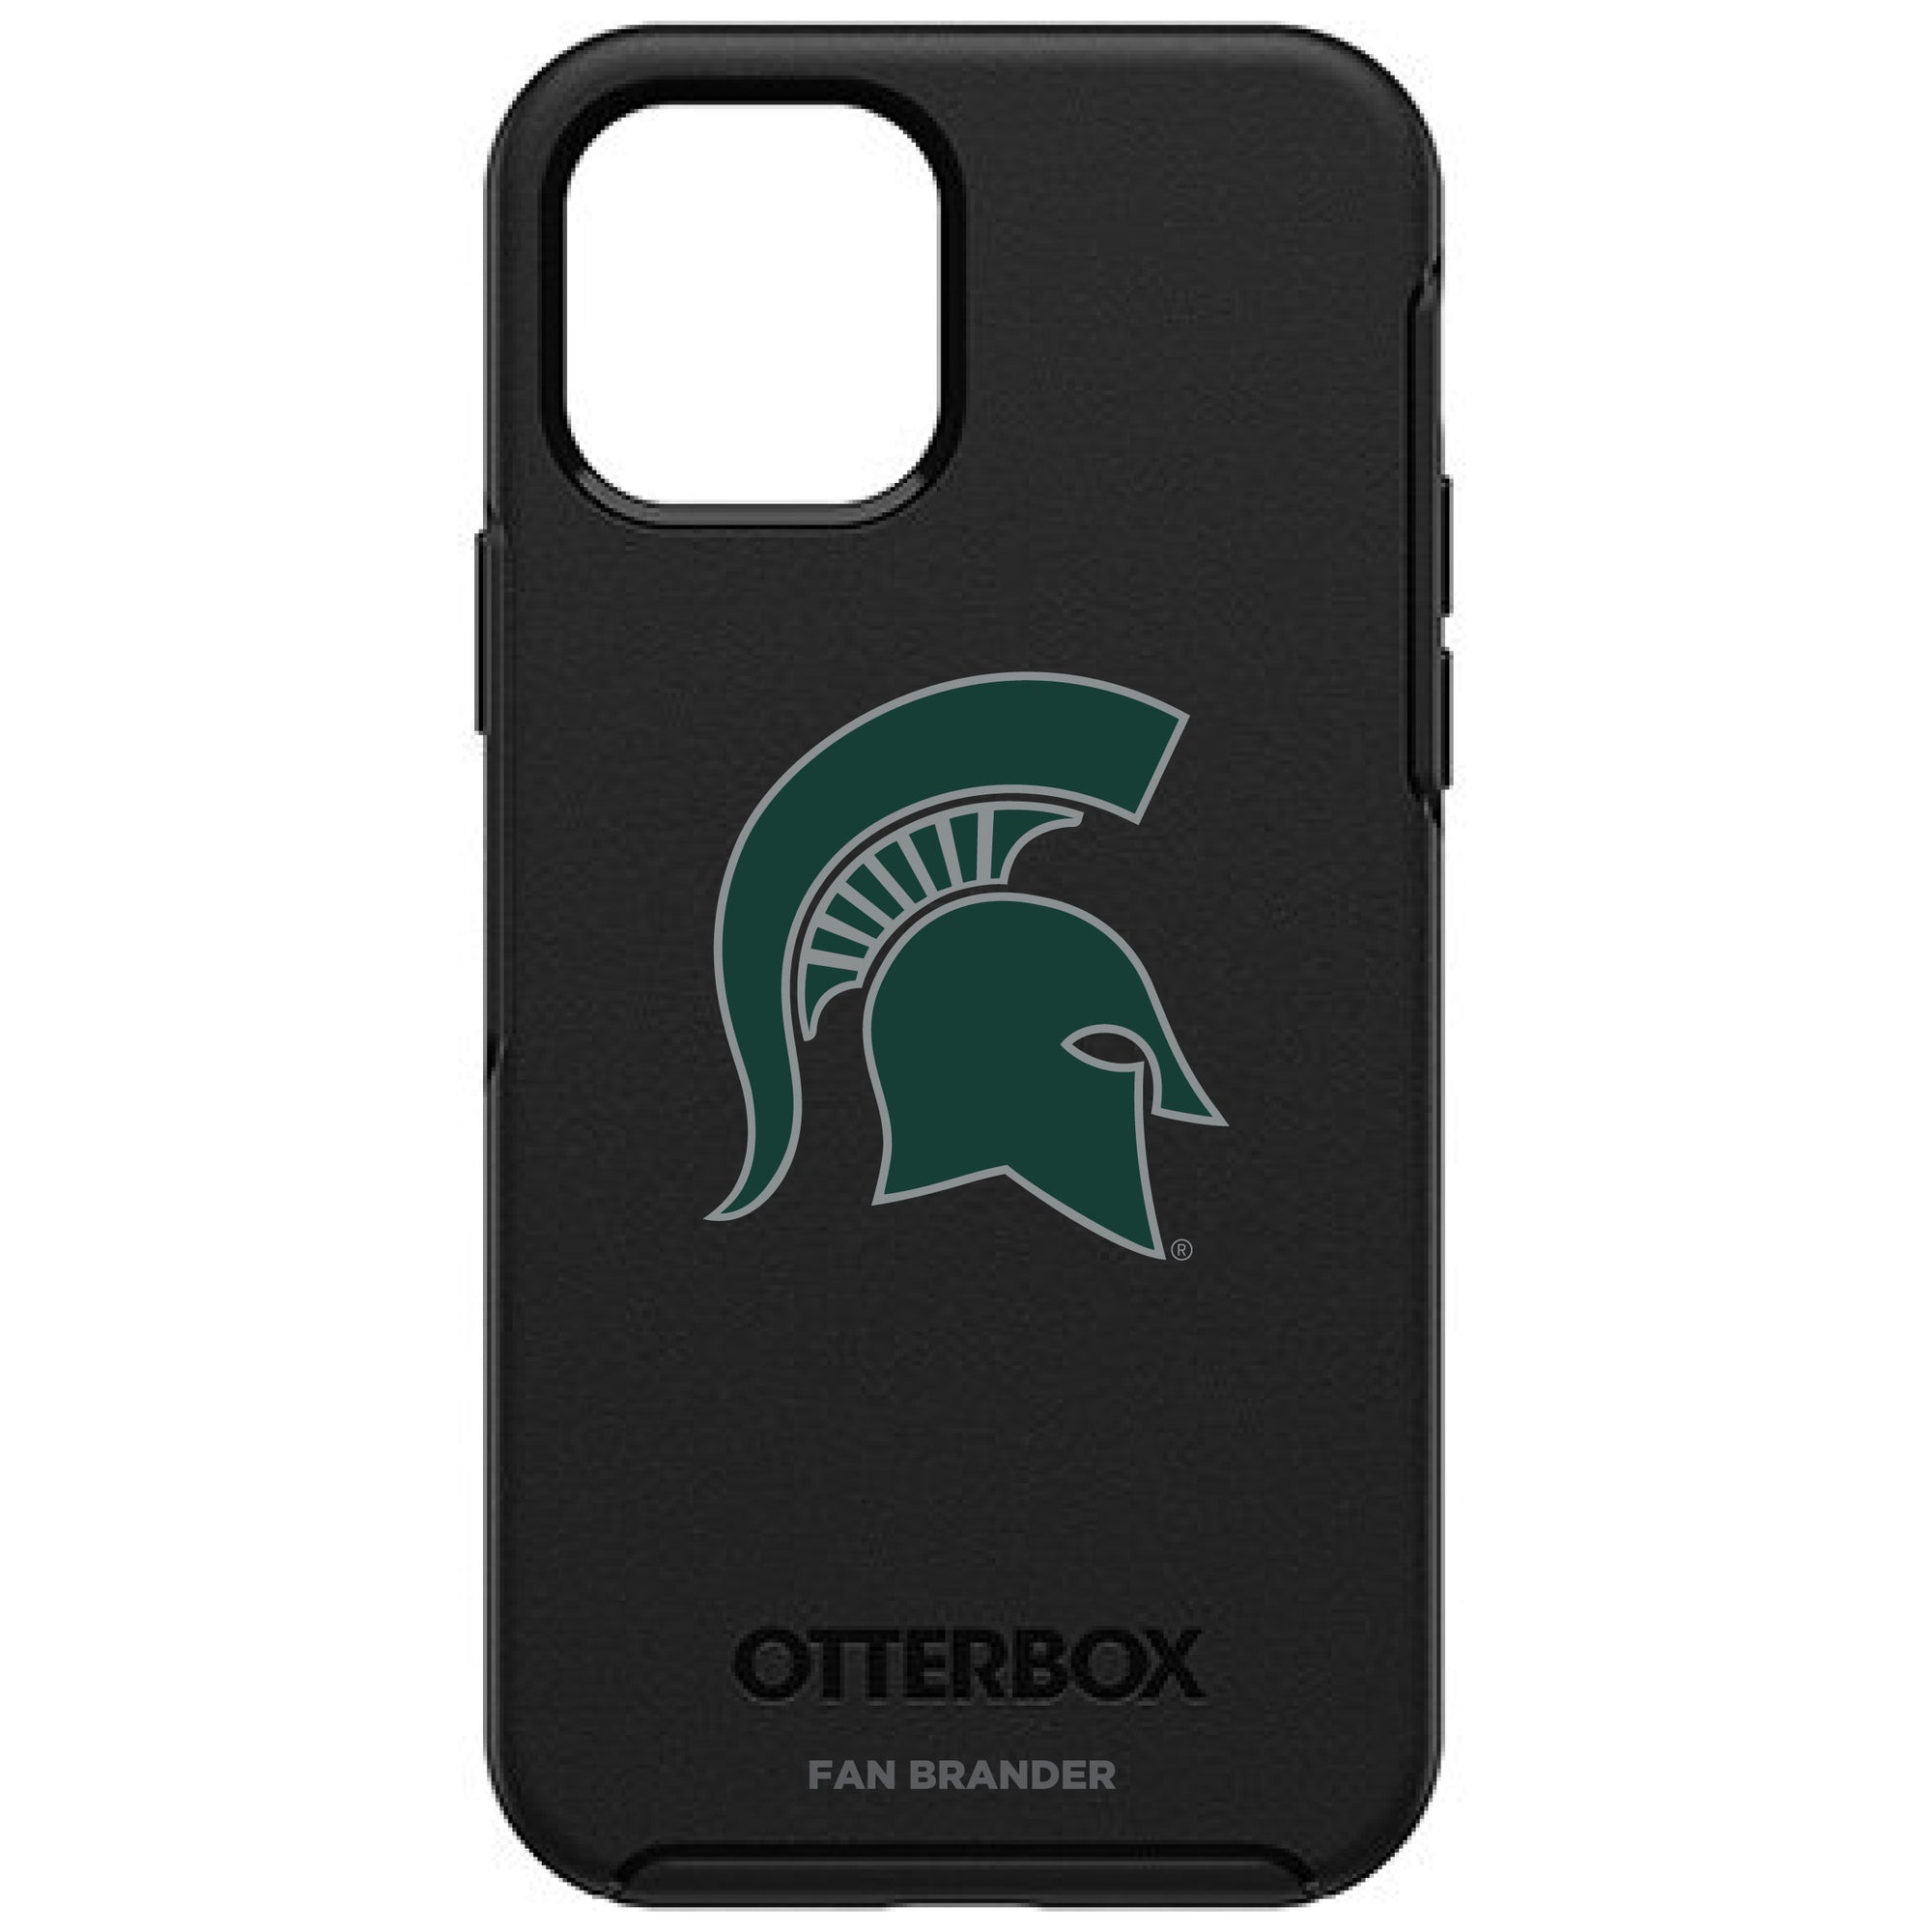 Michigan State Spartans Otterbox iPhone 12 and iPhone 12 Pro Symmetry Case